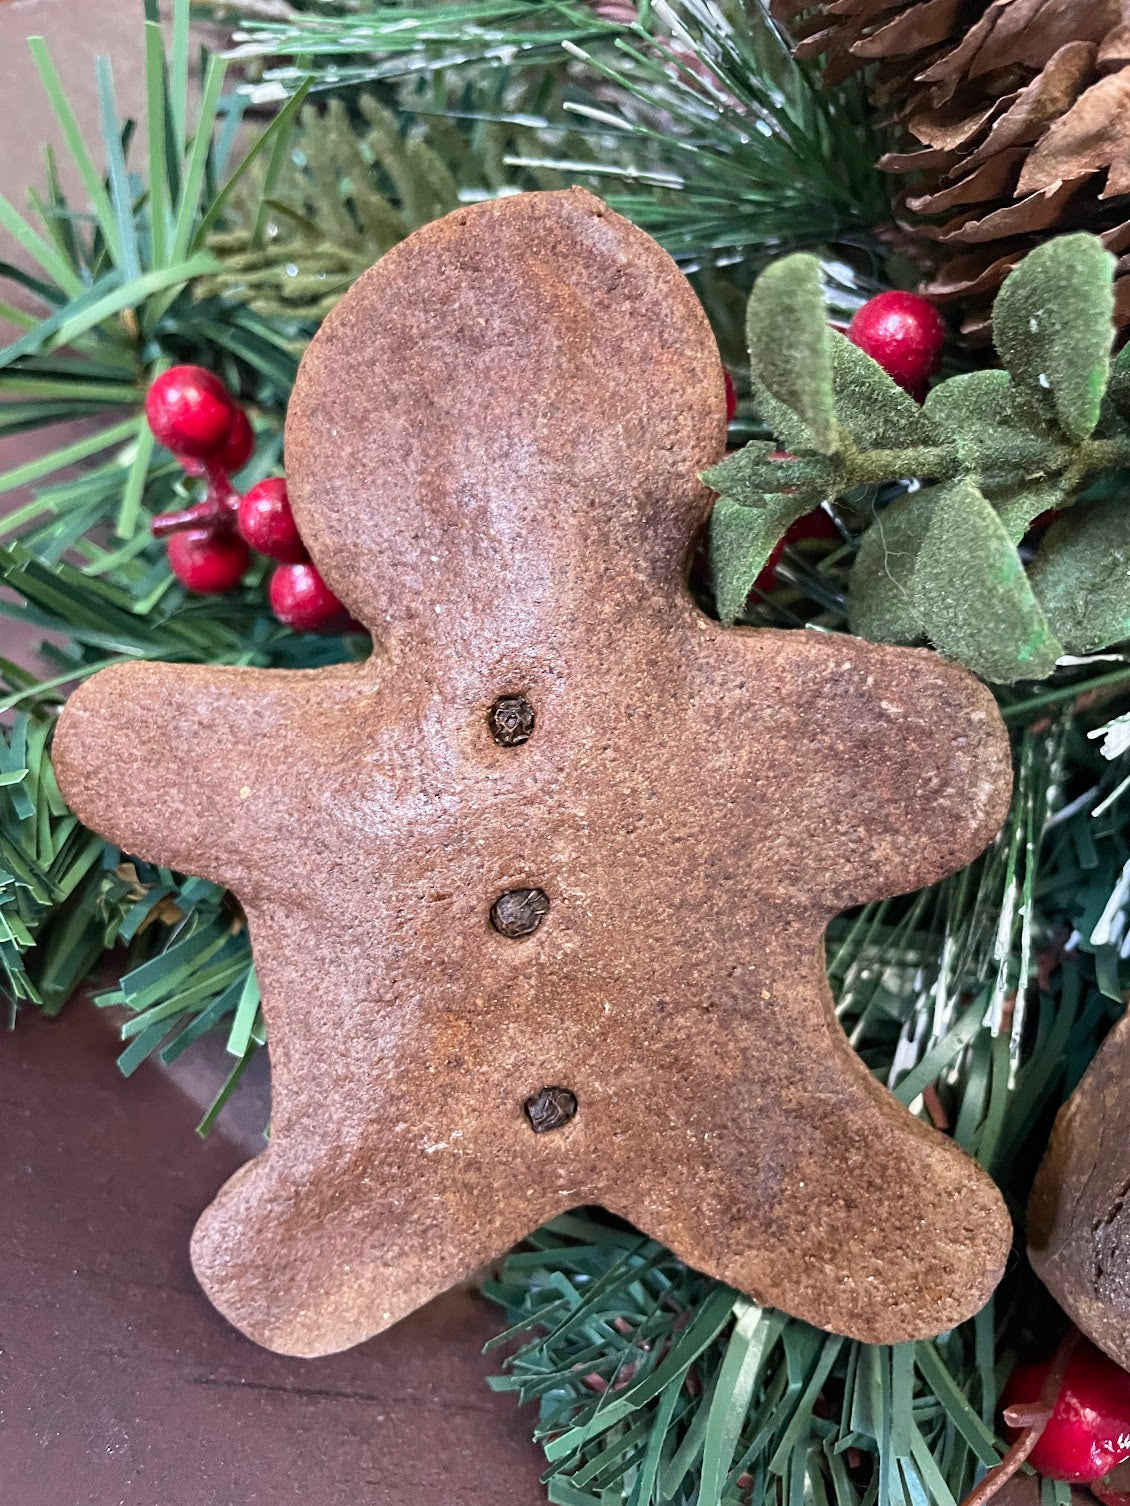 Primitive Christmas Gingerbread Man w/Frosted Gingerbread House Pantry Cake